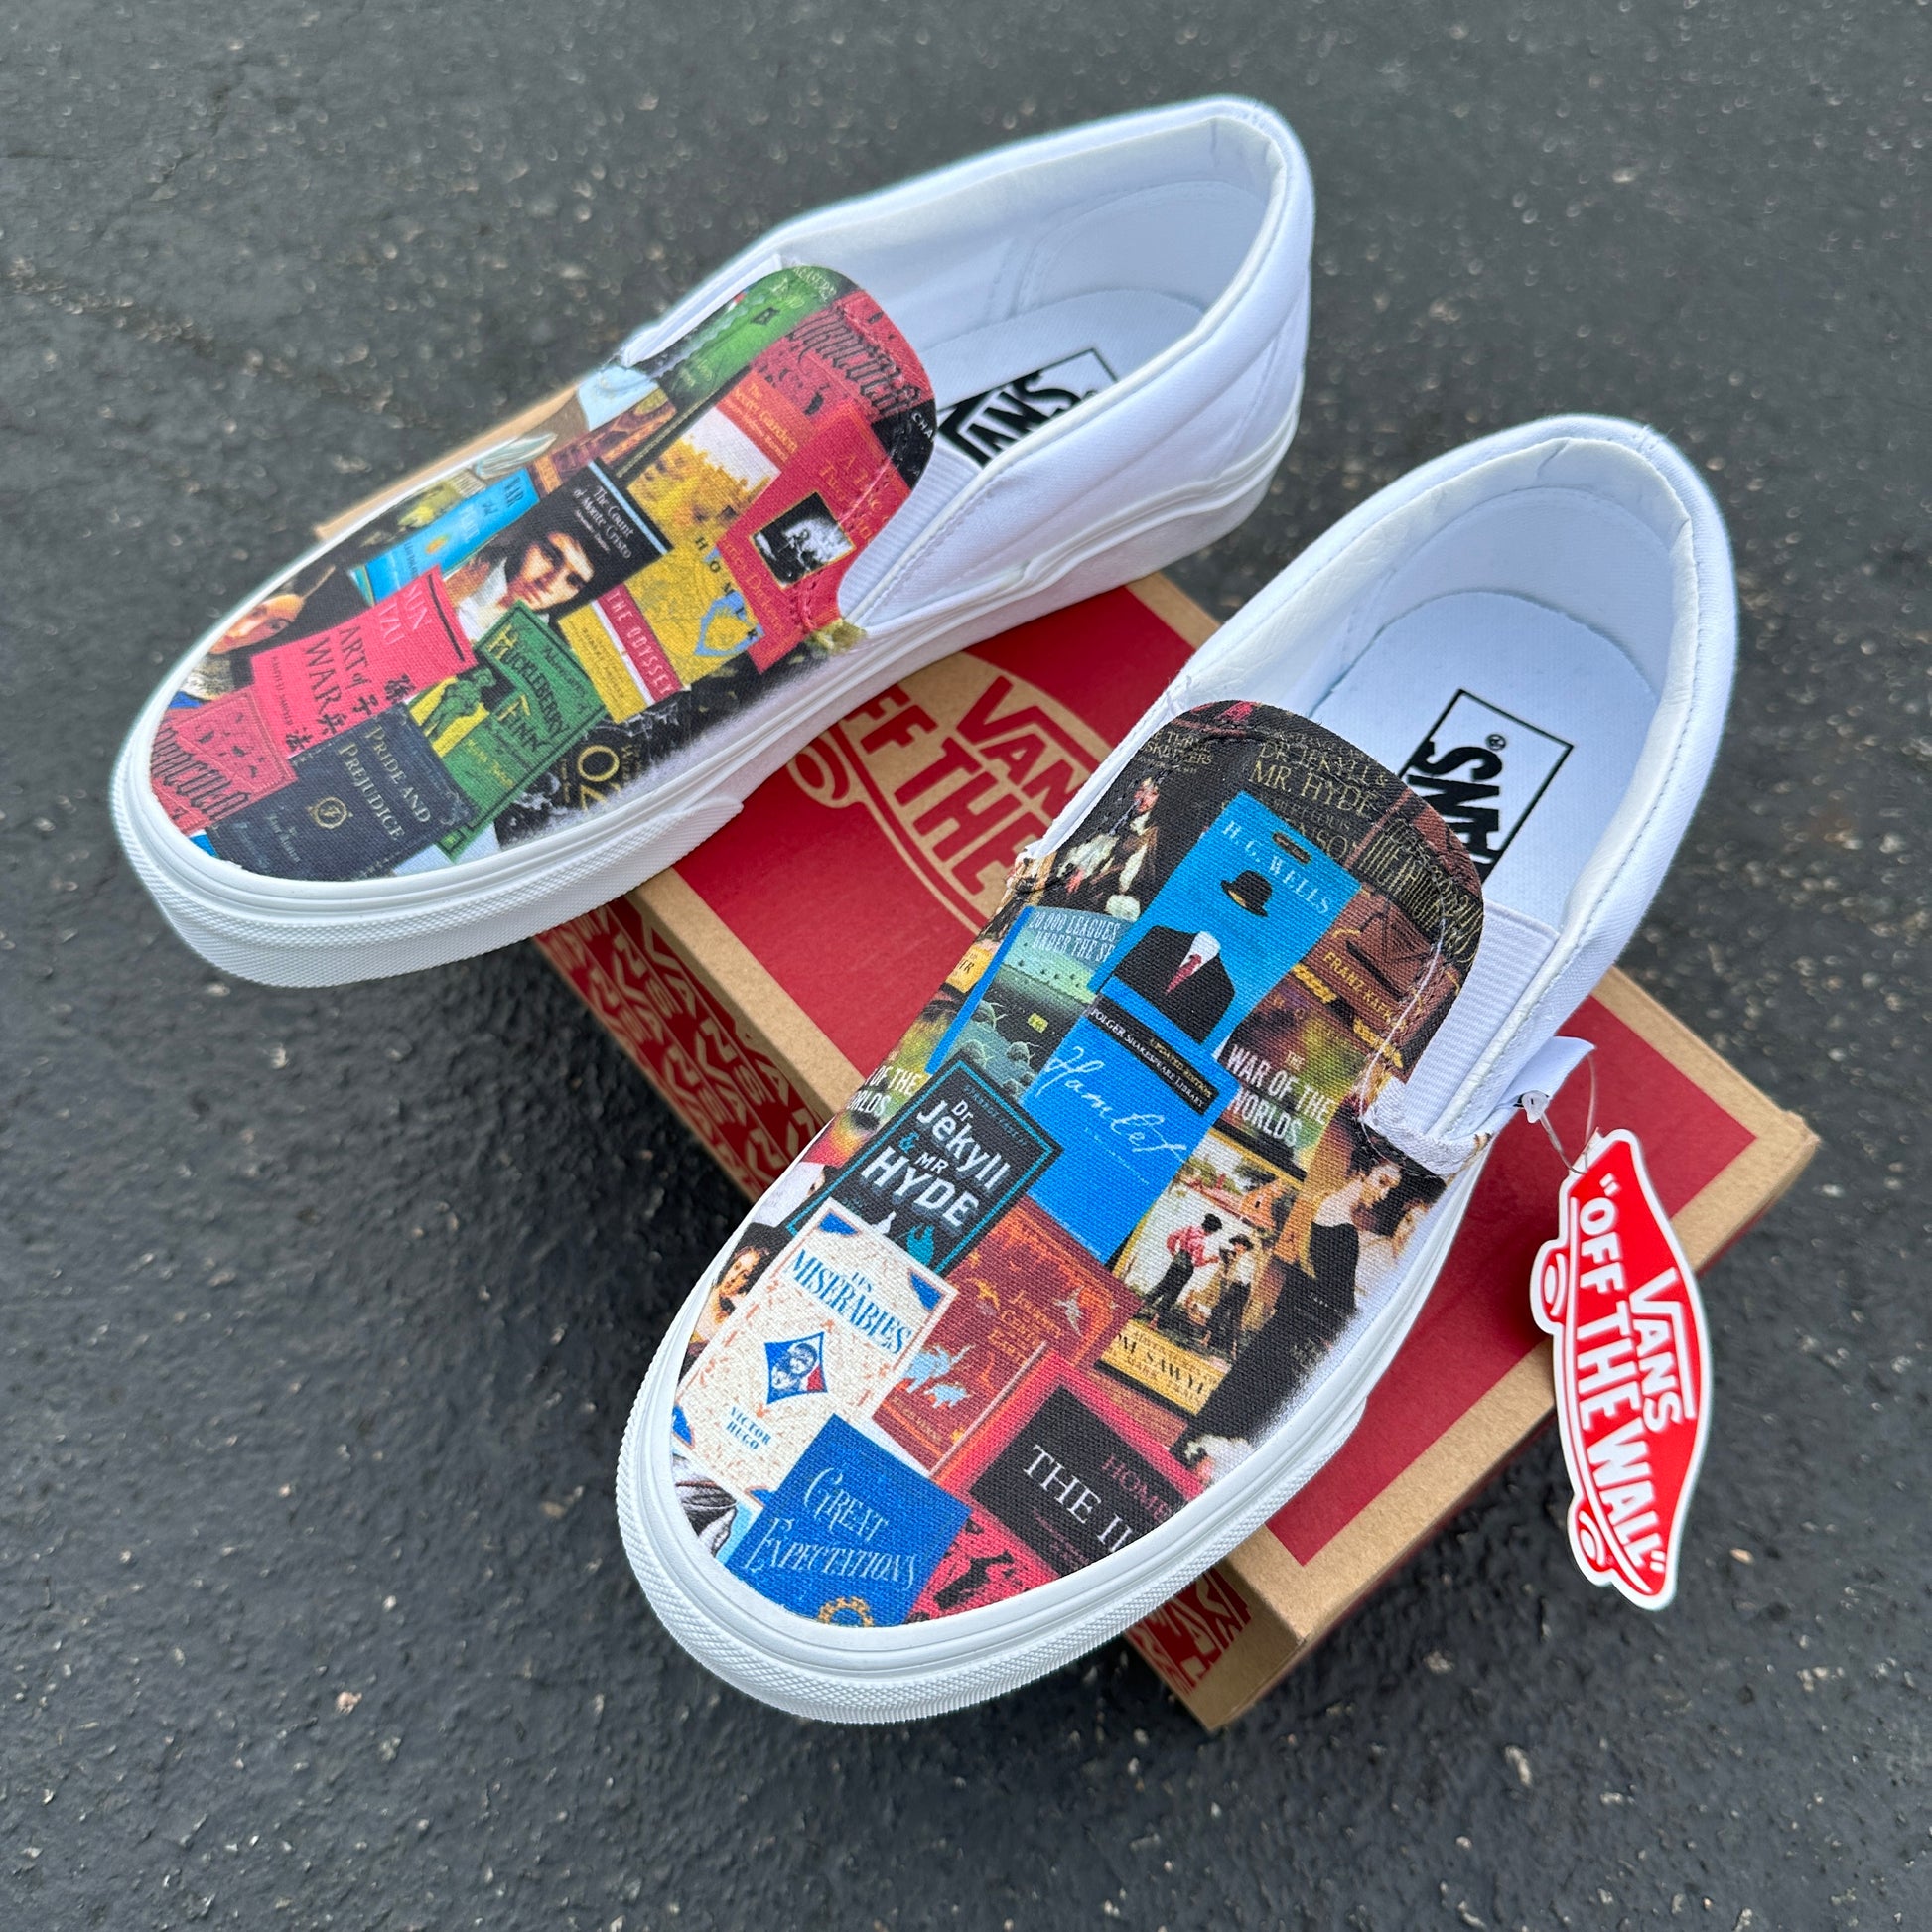 How to Customize Your Vans shoes & Slip Ons